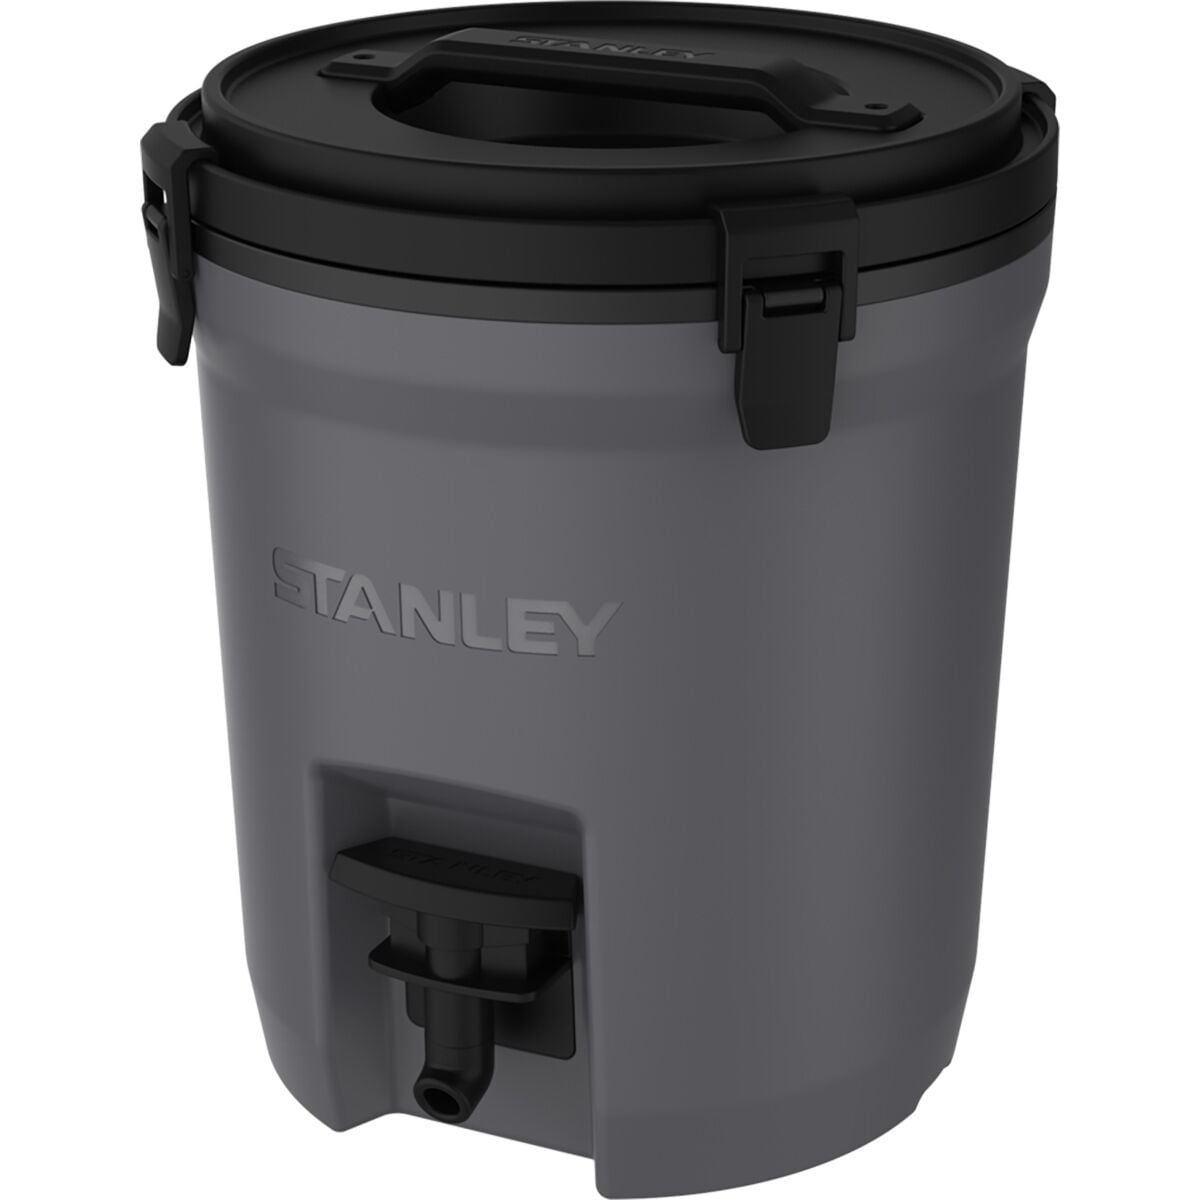 Stanley Stay Hot Camp Crock - Food and Waste Storage